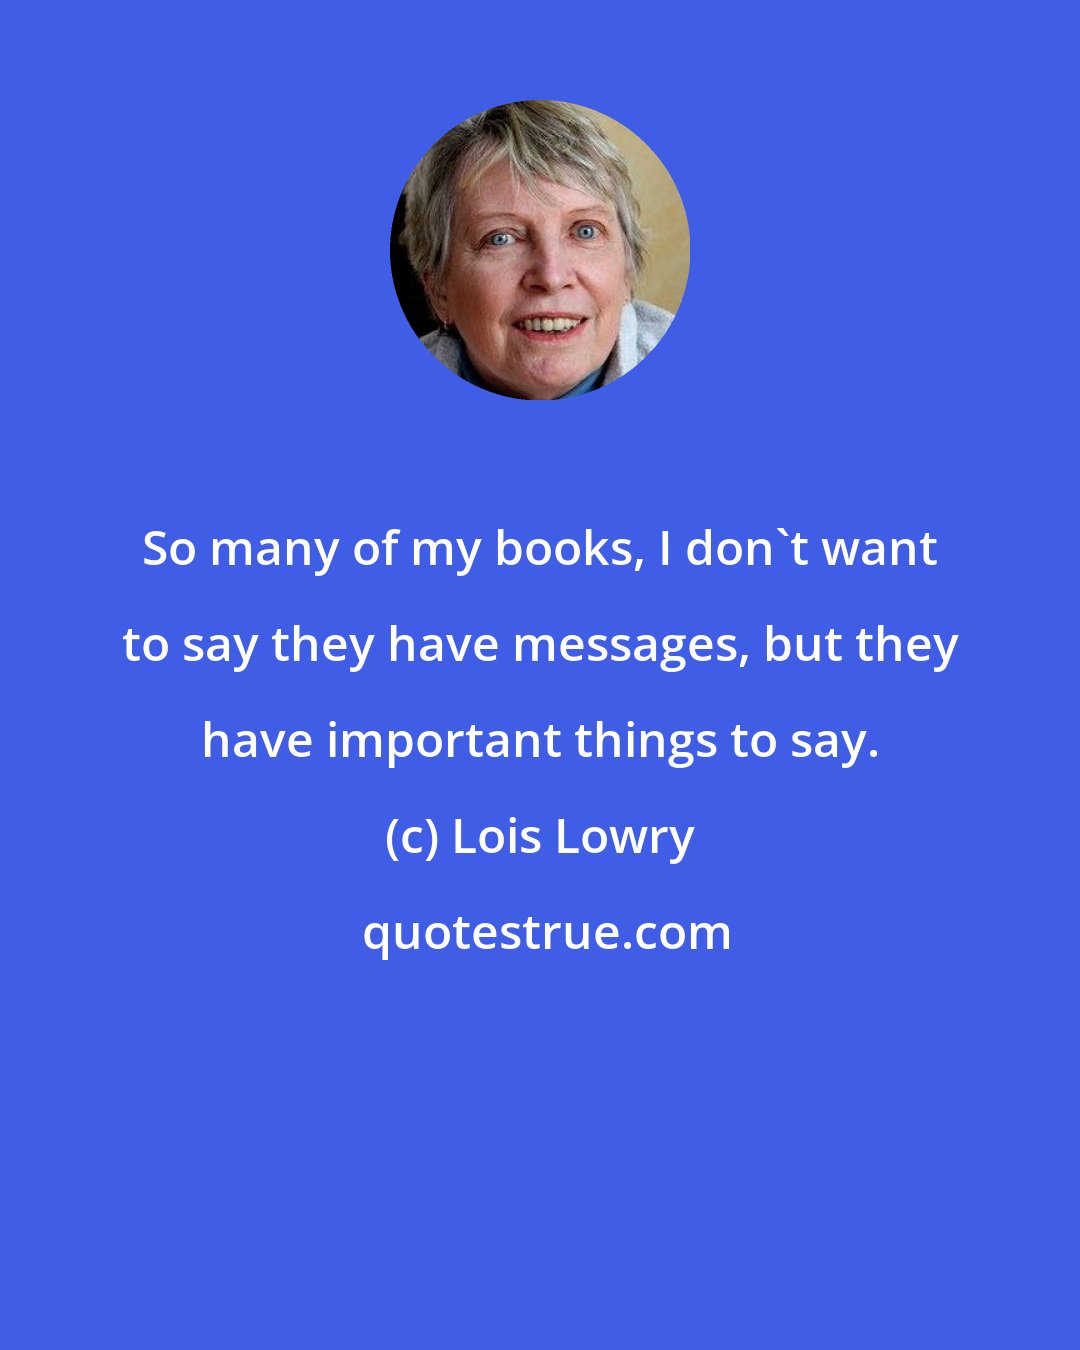 Lois Lowry: So many of my books, I don't want to say they have messages, but they have important things to say.